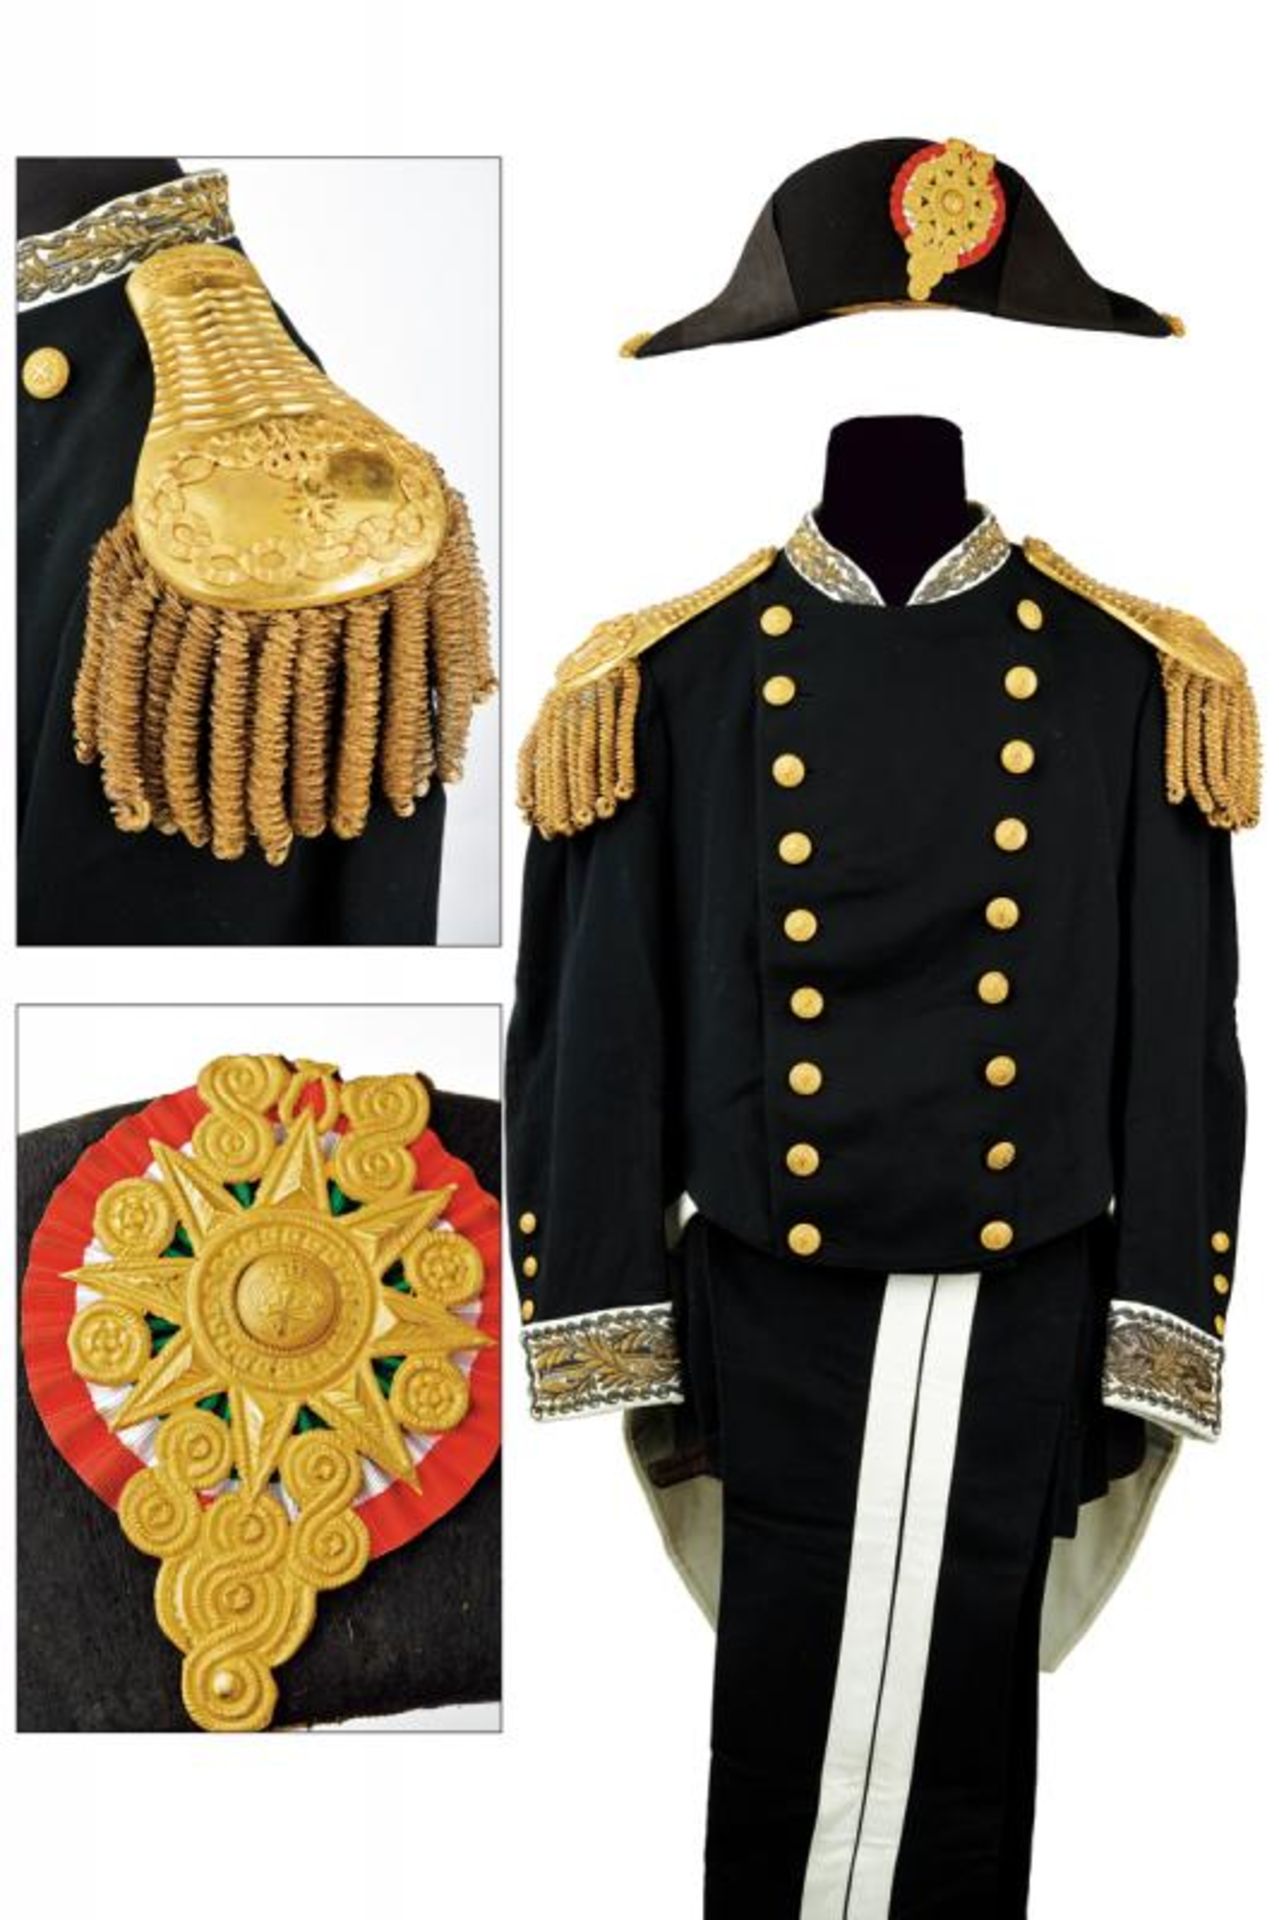 A complete uniform of the Order of Saints Maurice and Lazarus